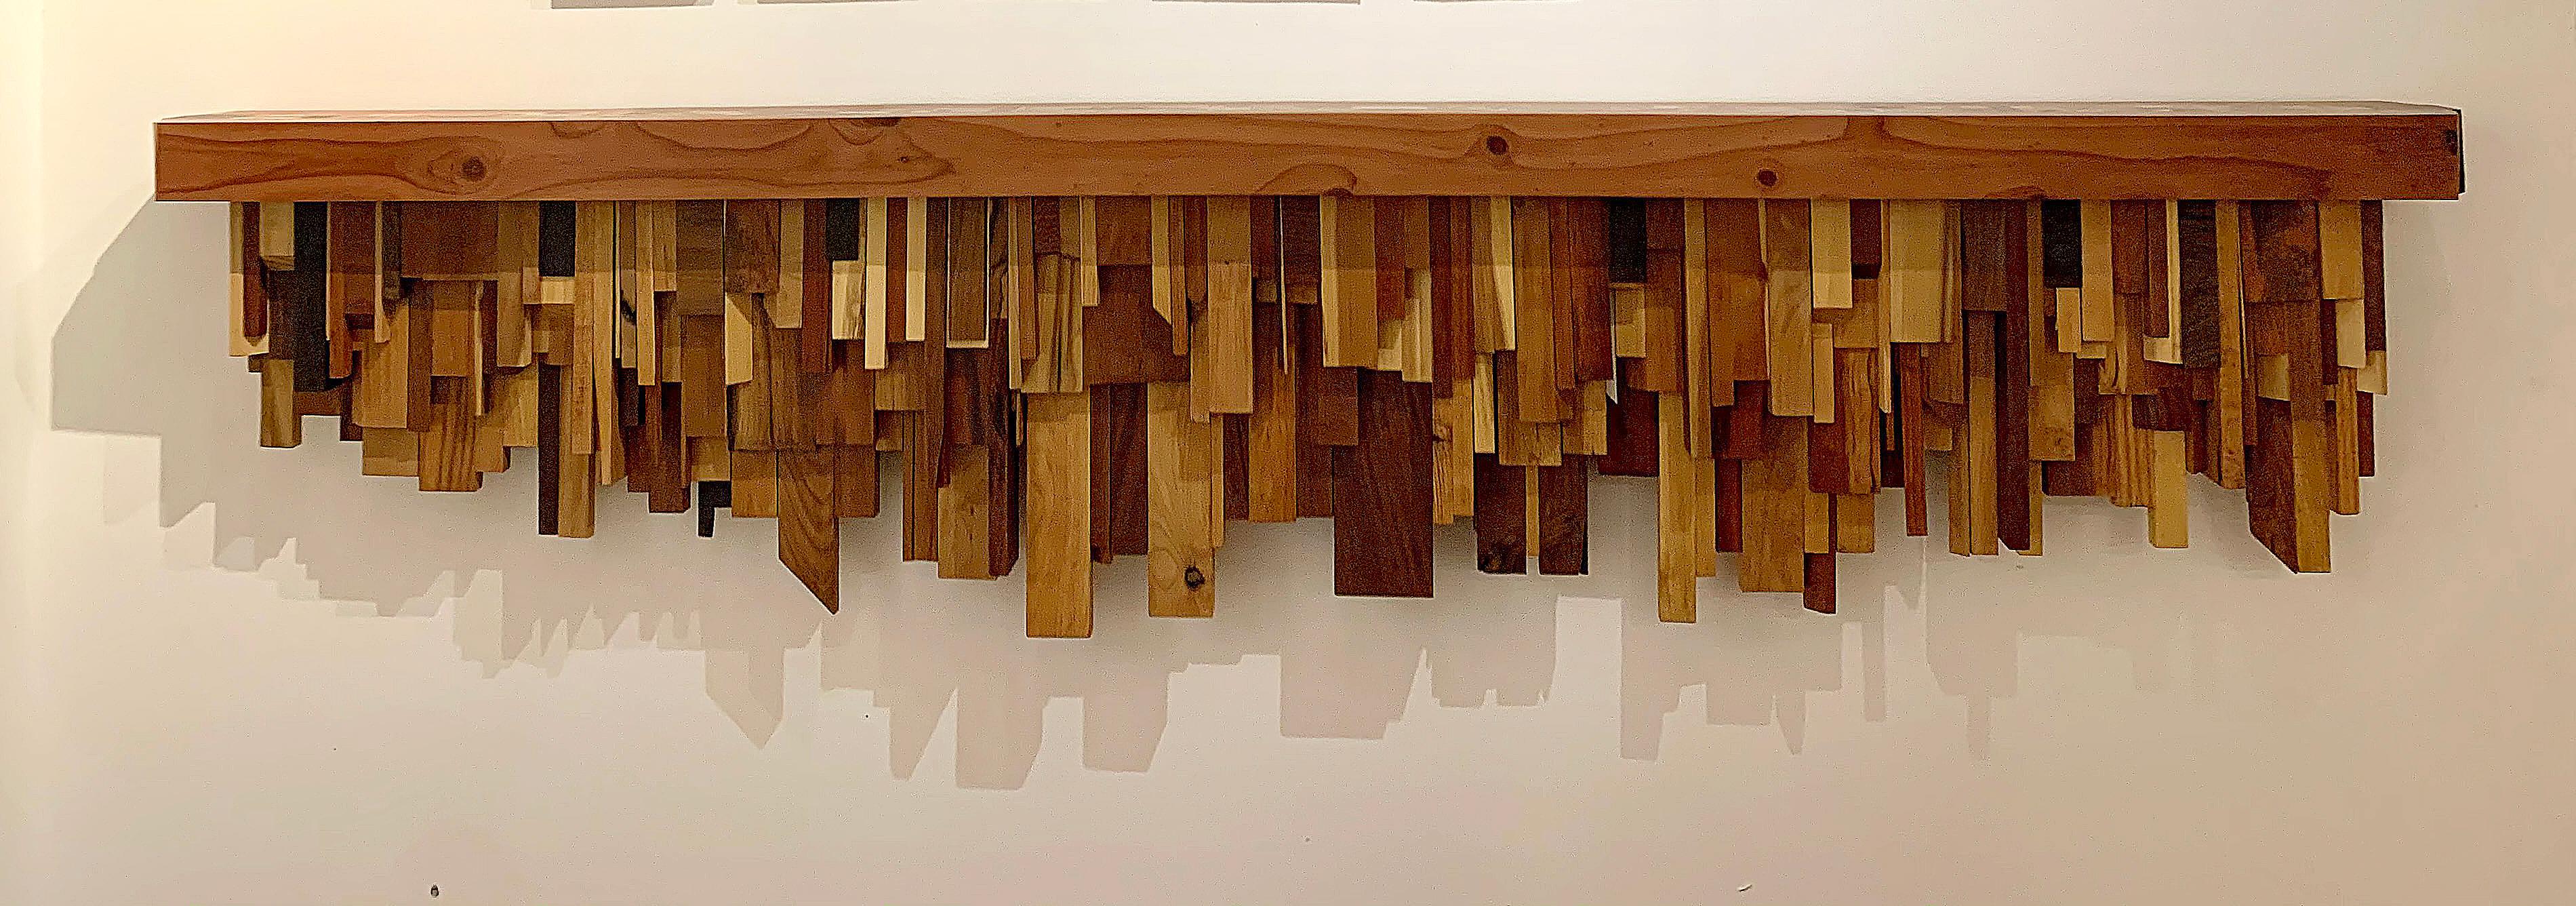 Mixed-media Long Mixed Wood Cityscape Shelf or Mantel by Artist Ben Darby, 2020